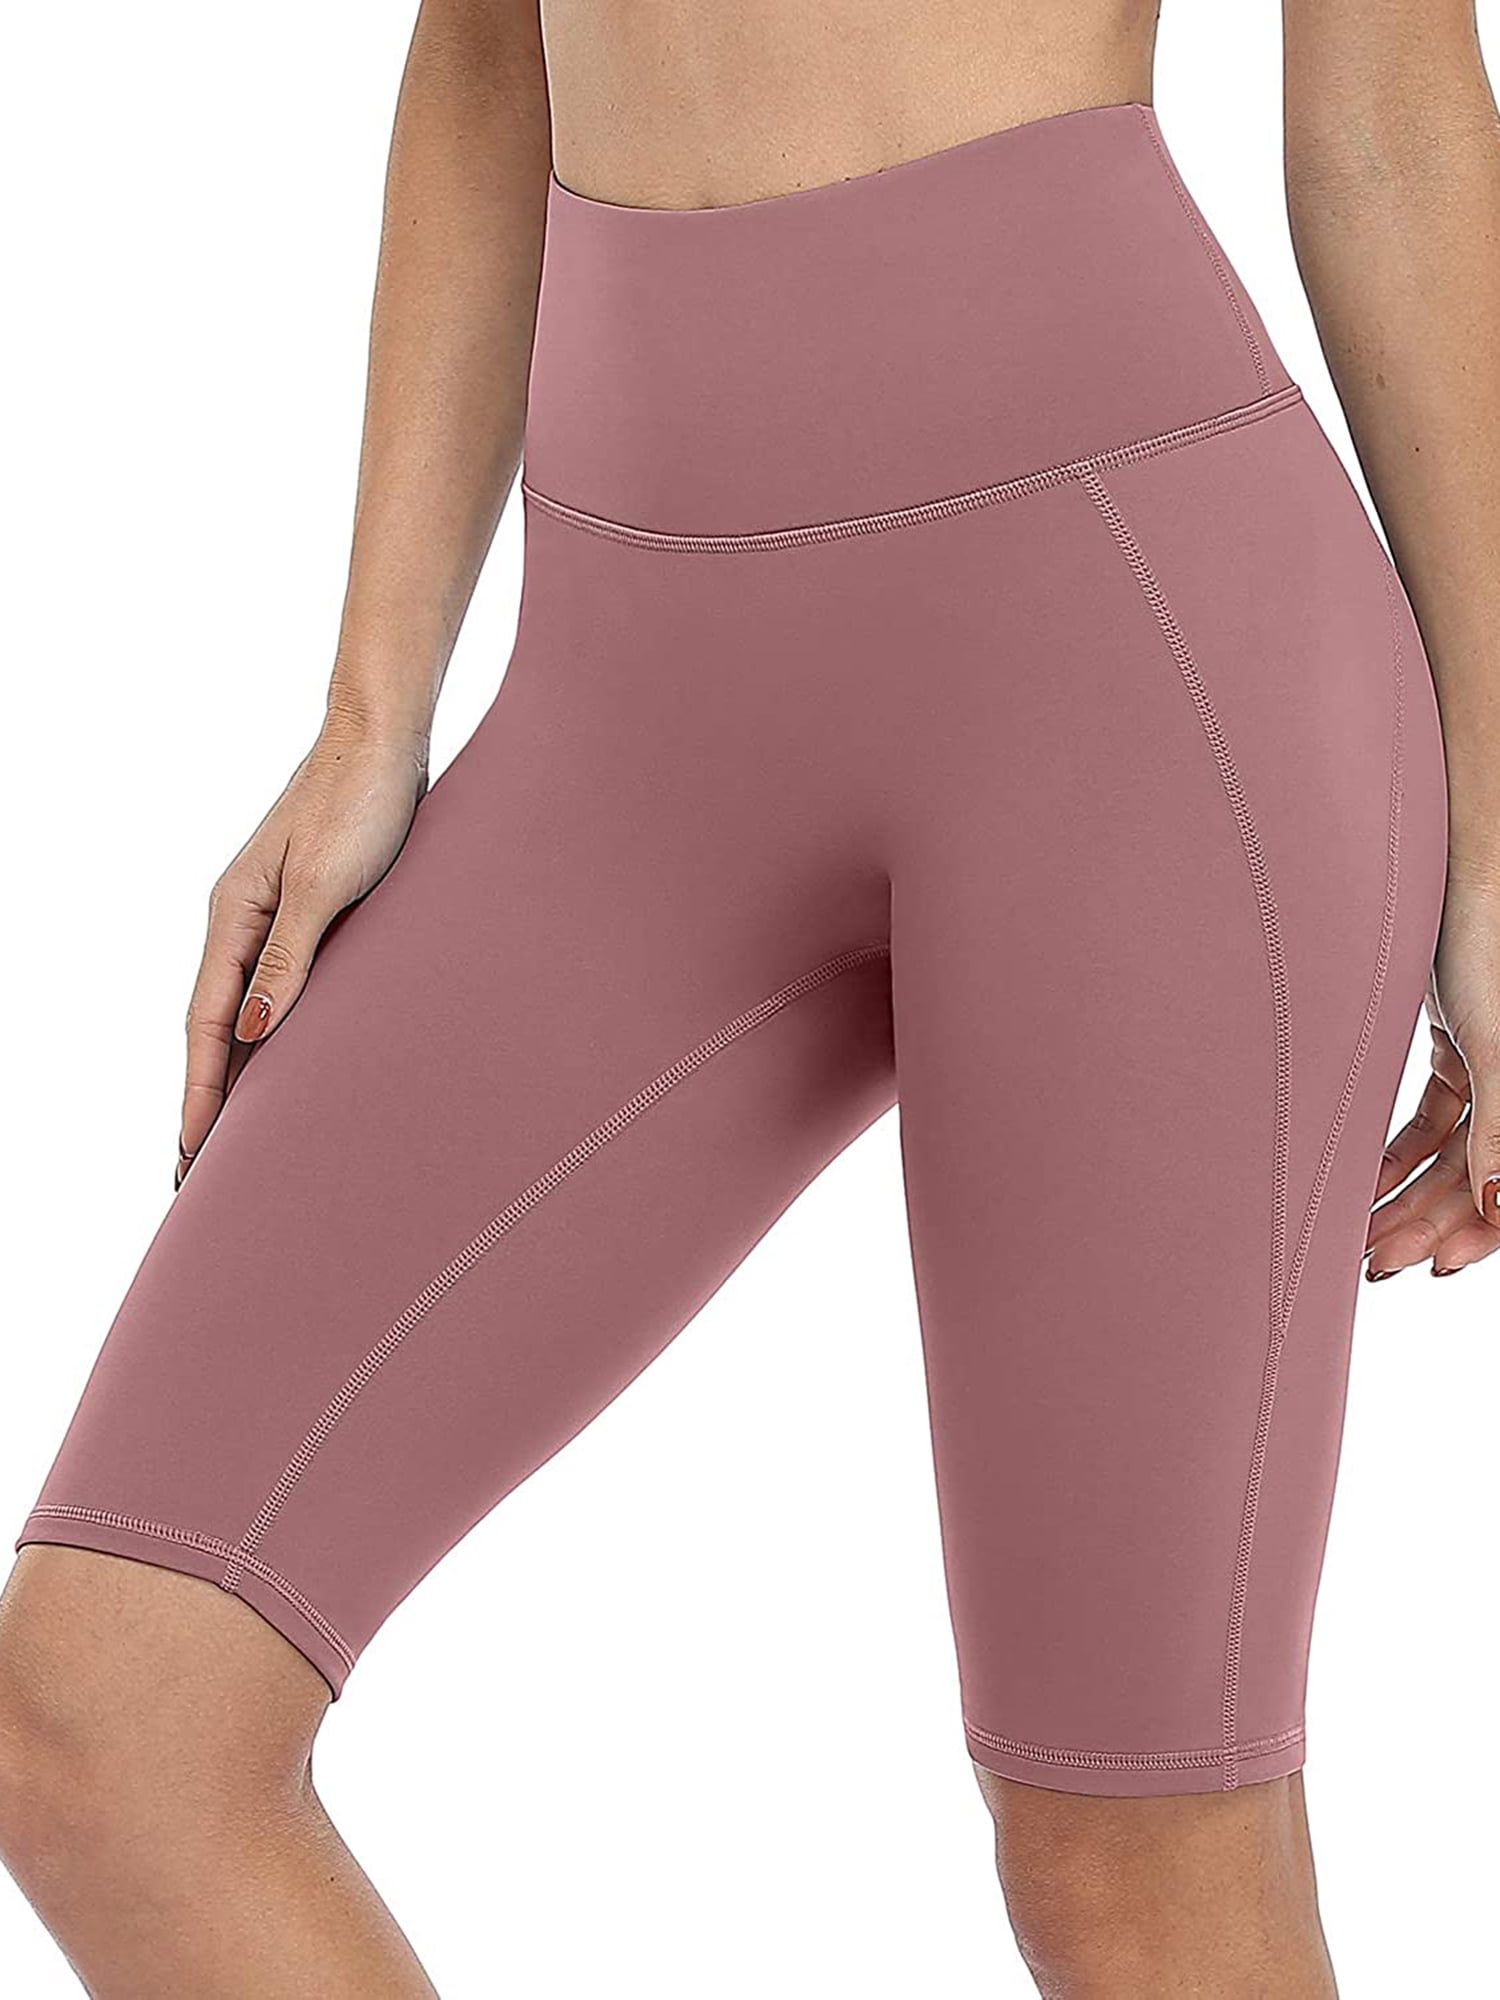 Real Essentials 4-Pack: Womens Capri Leggings Yoga Pants Pants Women  Workout Tummy Control Exercise Pockets Gym Athletic Soft Compression  Running Knee Length Ladies Teen High Waisted - Set 1, S at